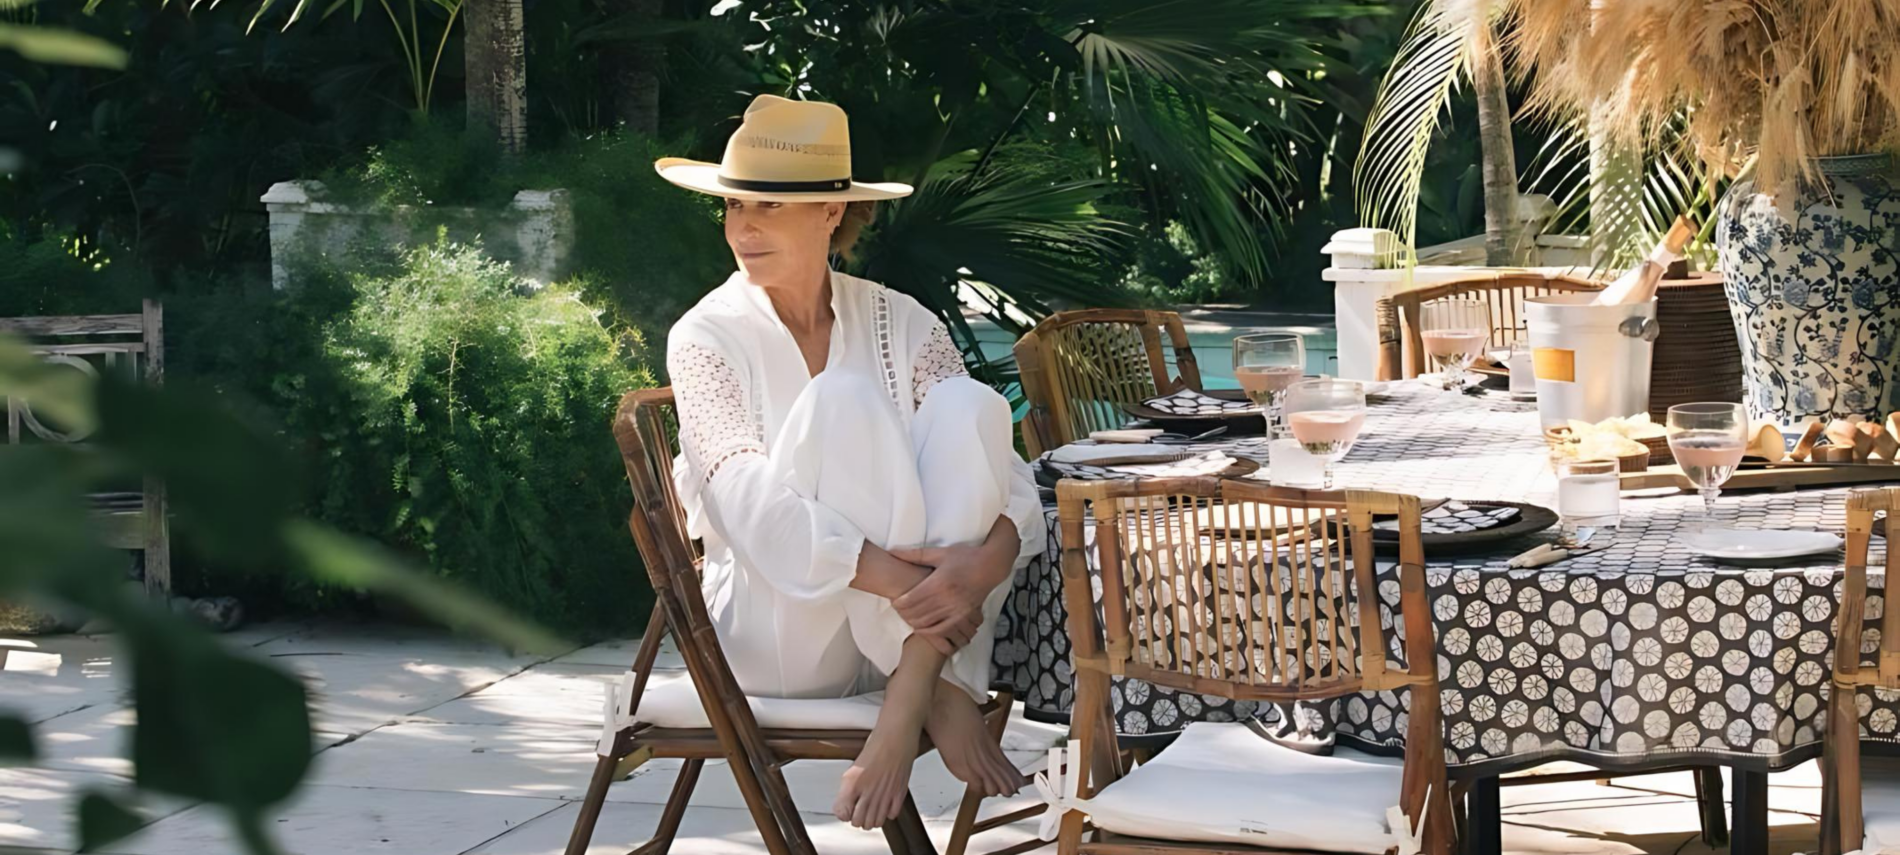 A serene alfresco dining scene with a stylish India Hicks in a white outfit and straw hat sitting thoughtfully at a beautifully set table amidst lush greenery